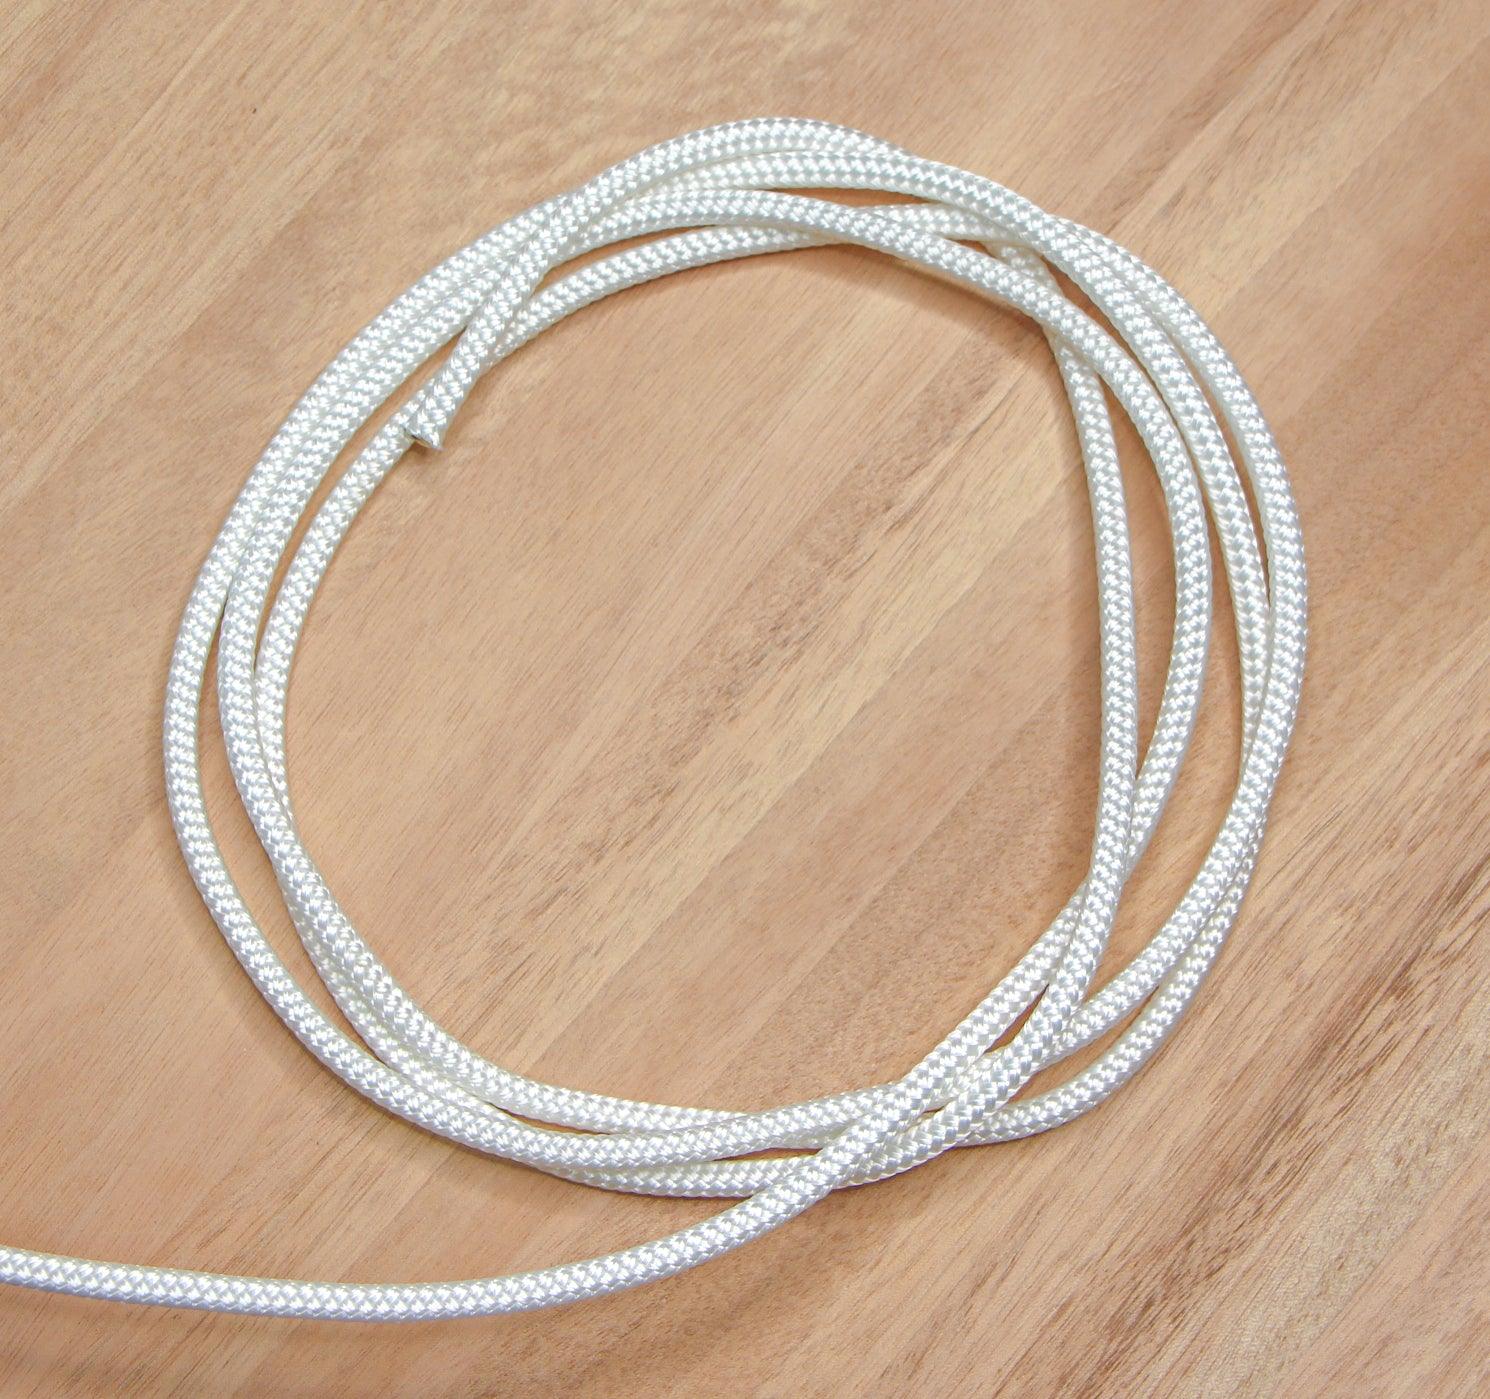 Marine Rope - White - 8mm - Cams Cords